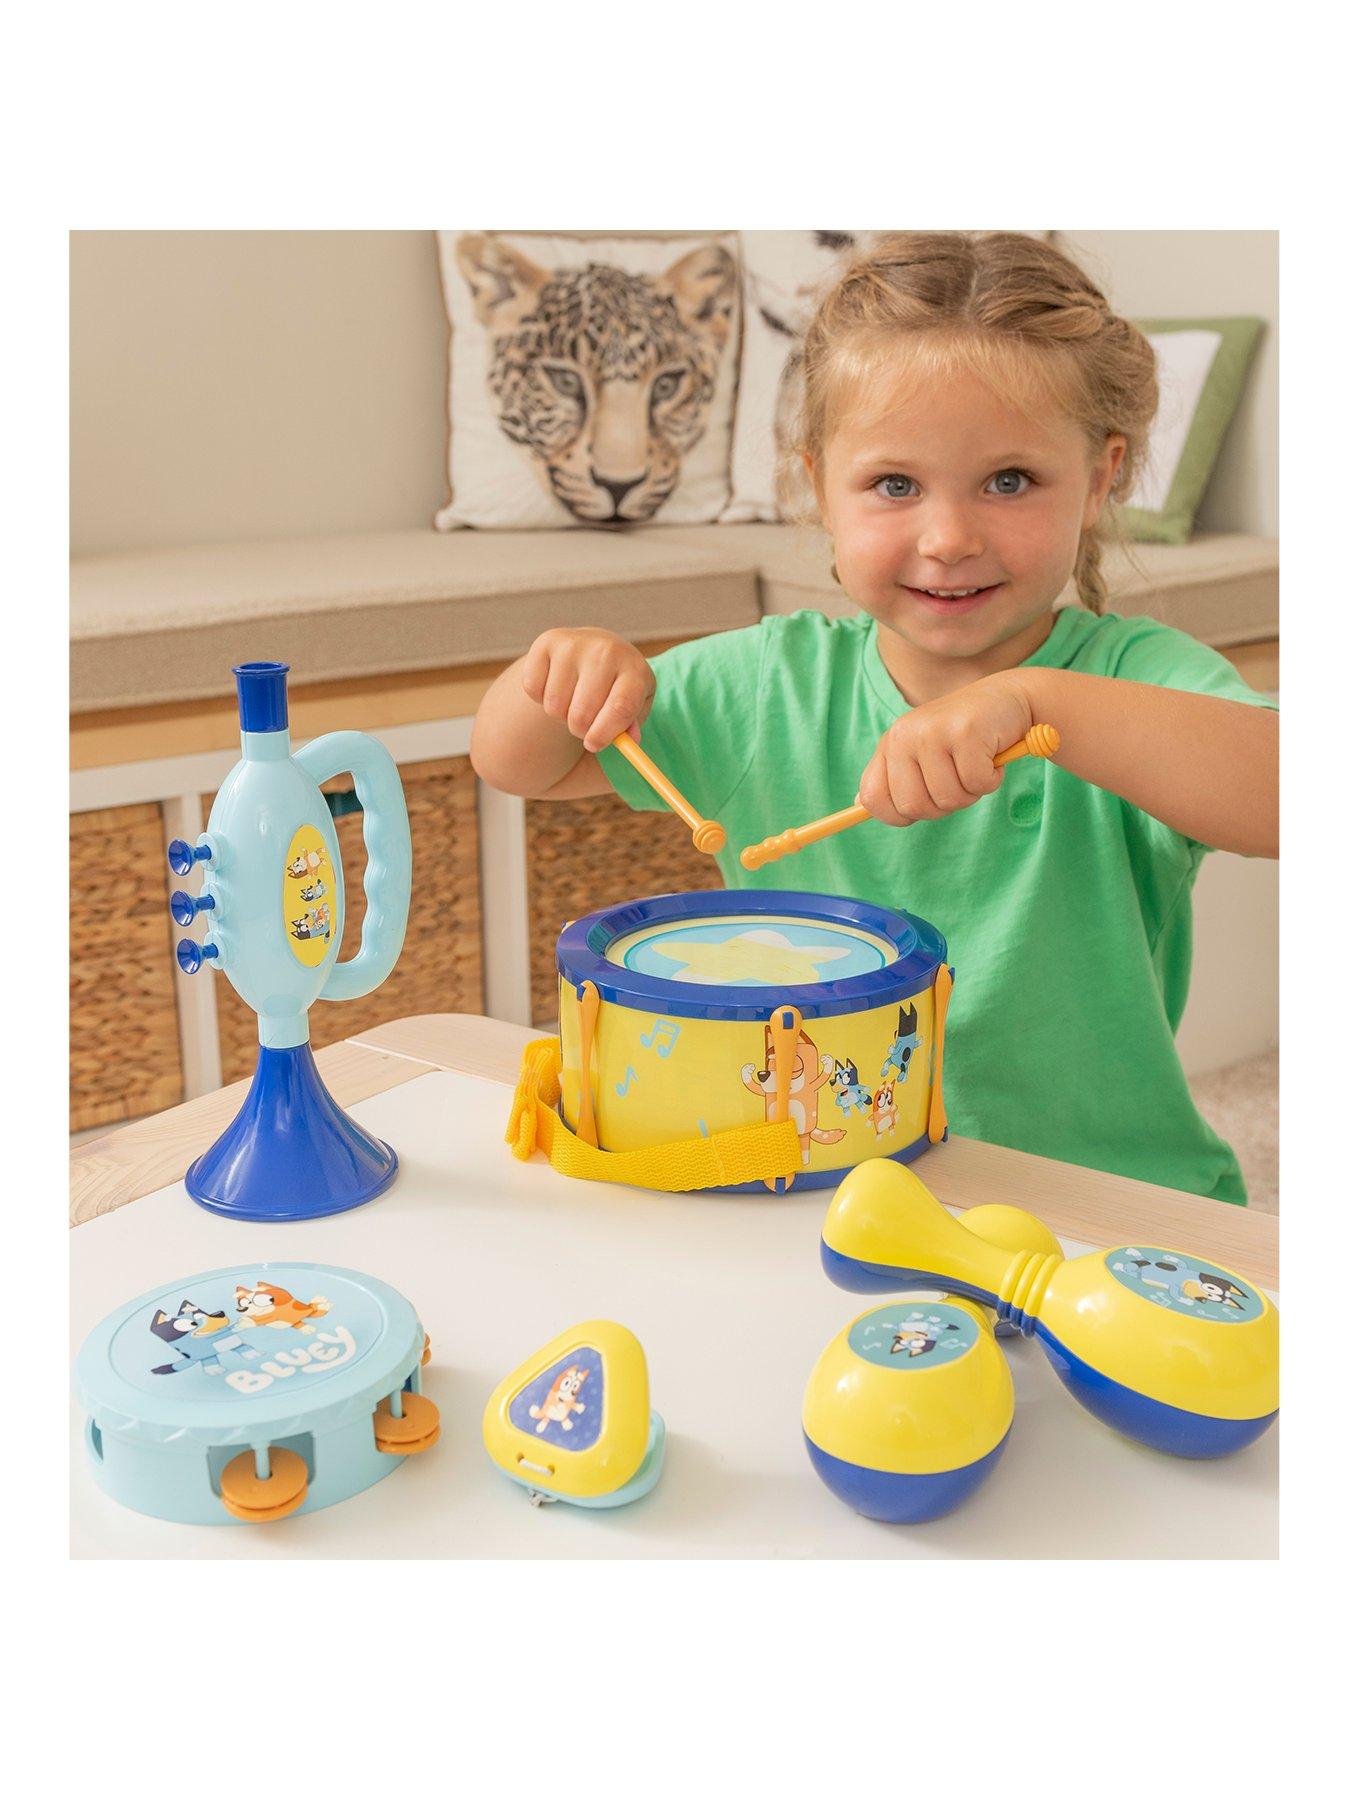 Bluey Paint & Play Tea Party, 6-Piece Wooden Tea Set, Customize with Paint  & Bluey Stickers, 2 Wearable Crowns, Fun Toys for Kids, Cute Birthday Party